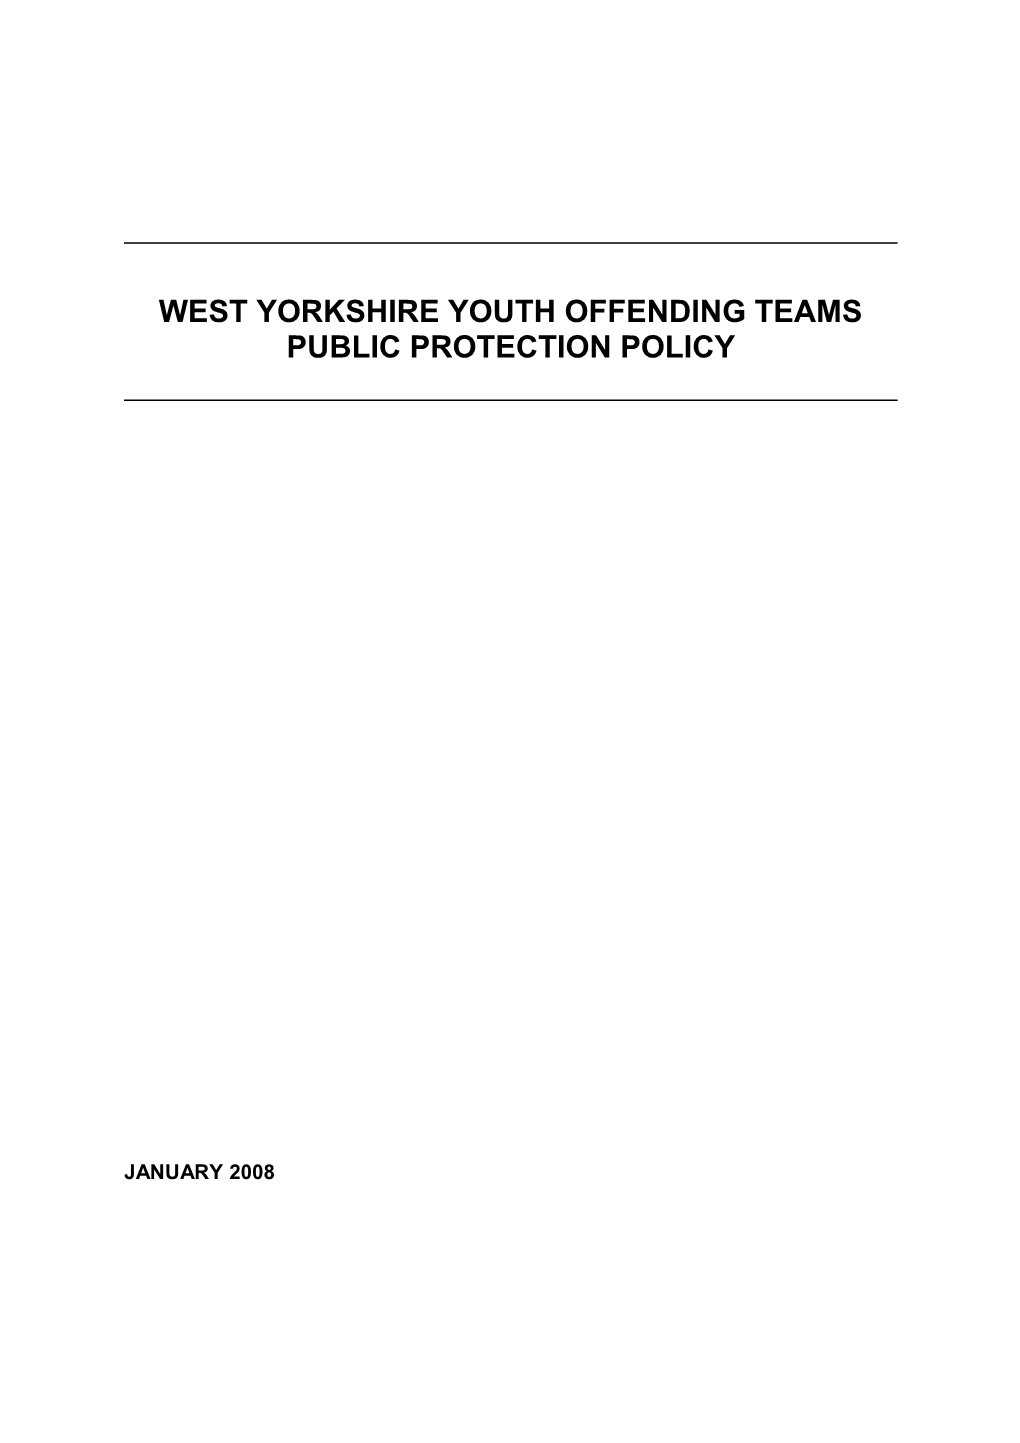 West Yorkshire Youth Offending Teams